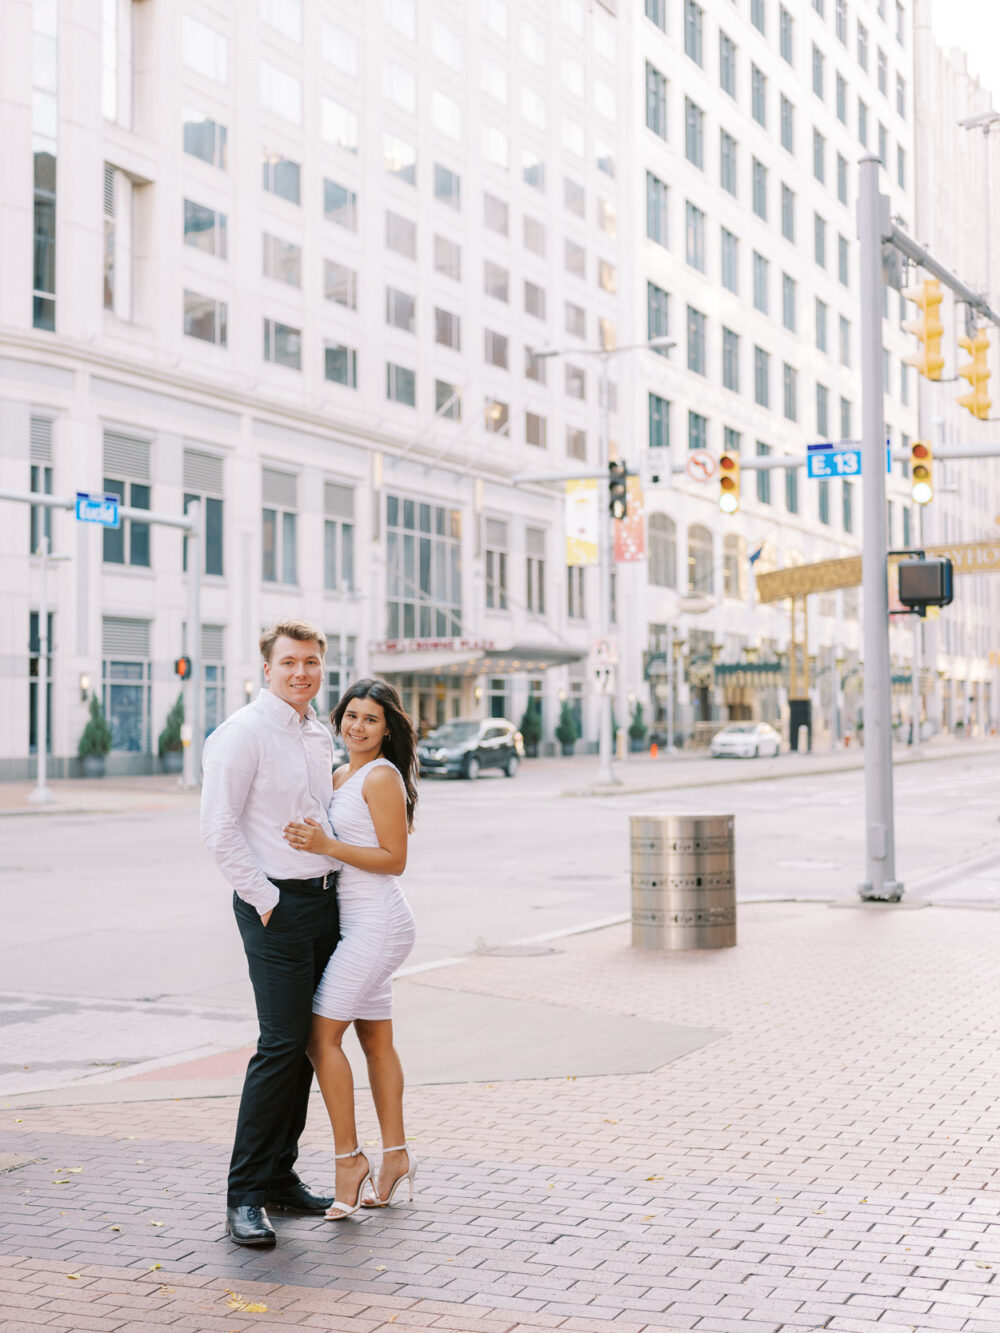 Engagement photo at Playhouse Square in Cleveland Ohio